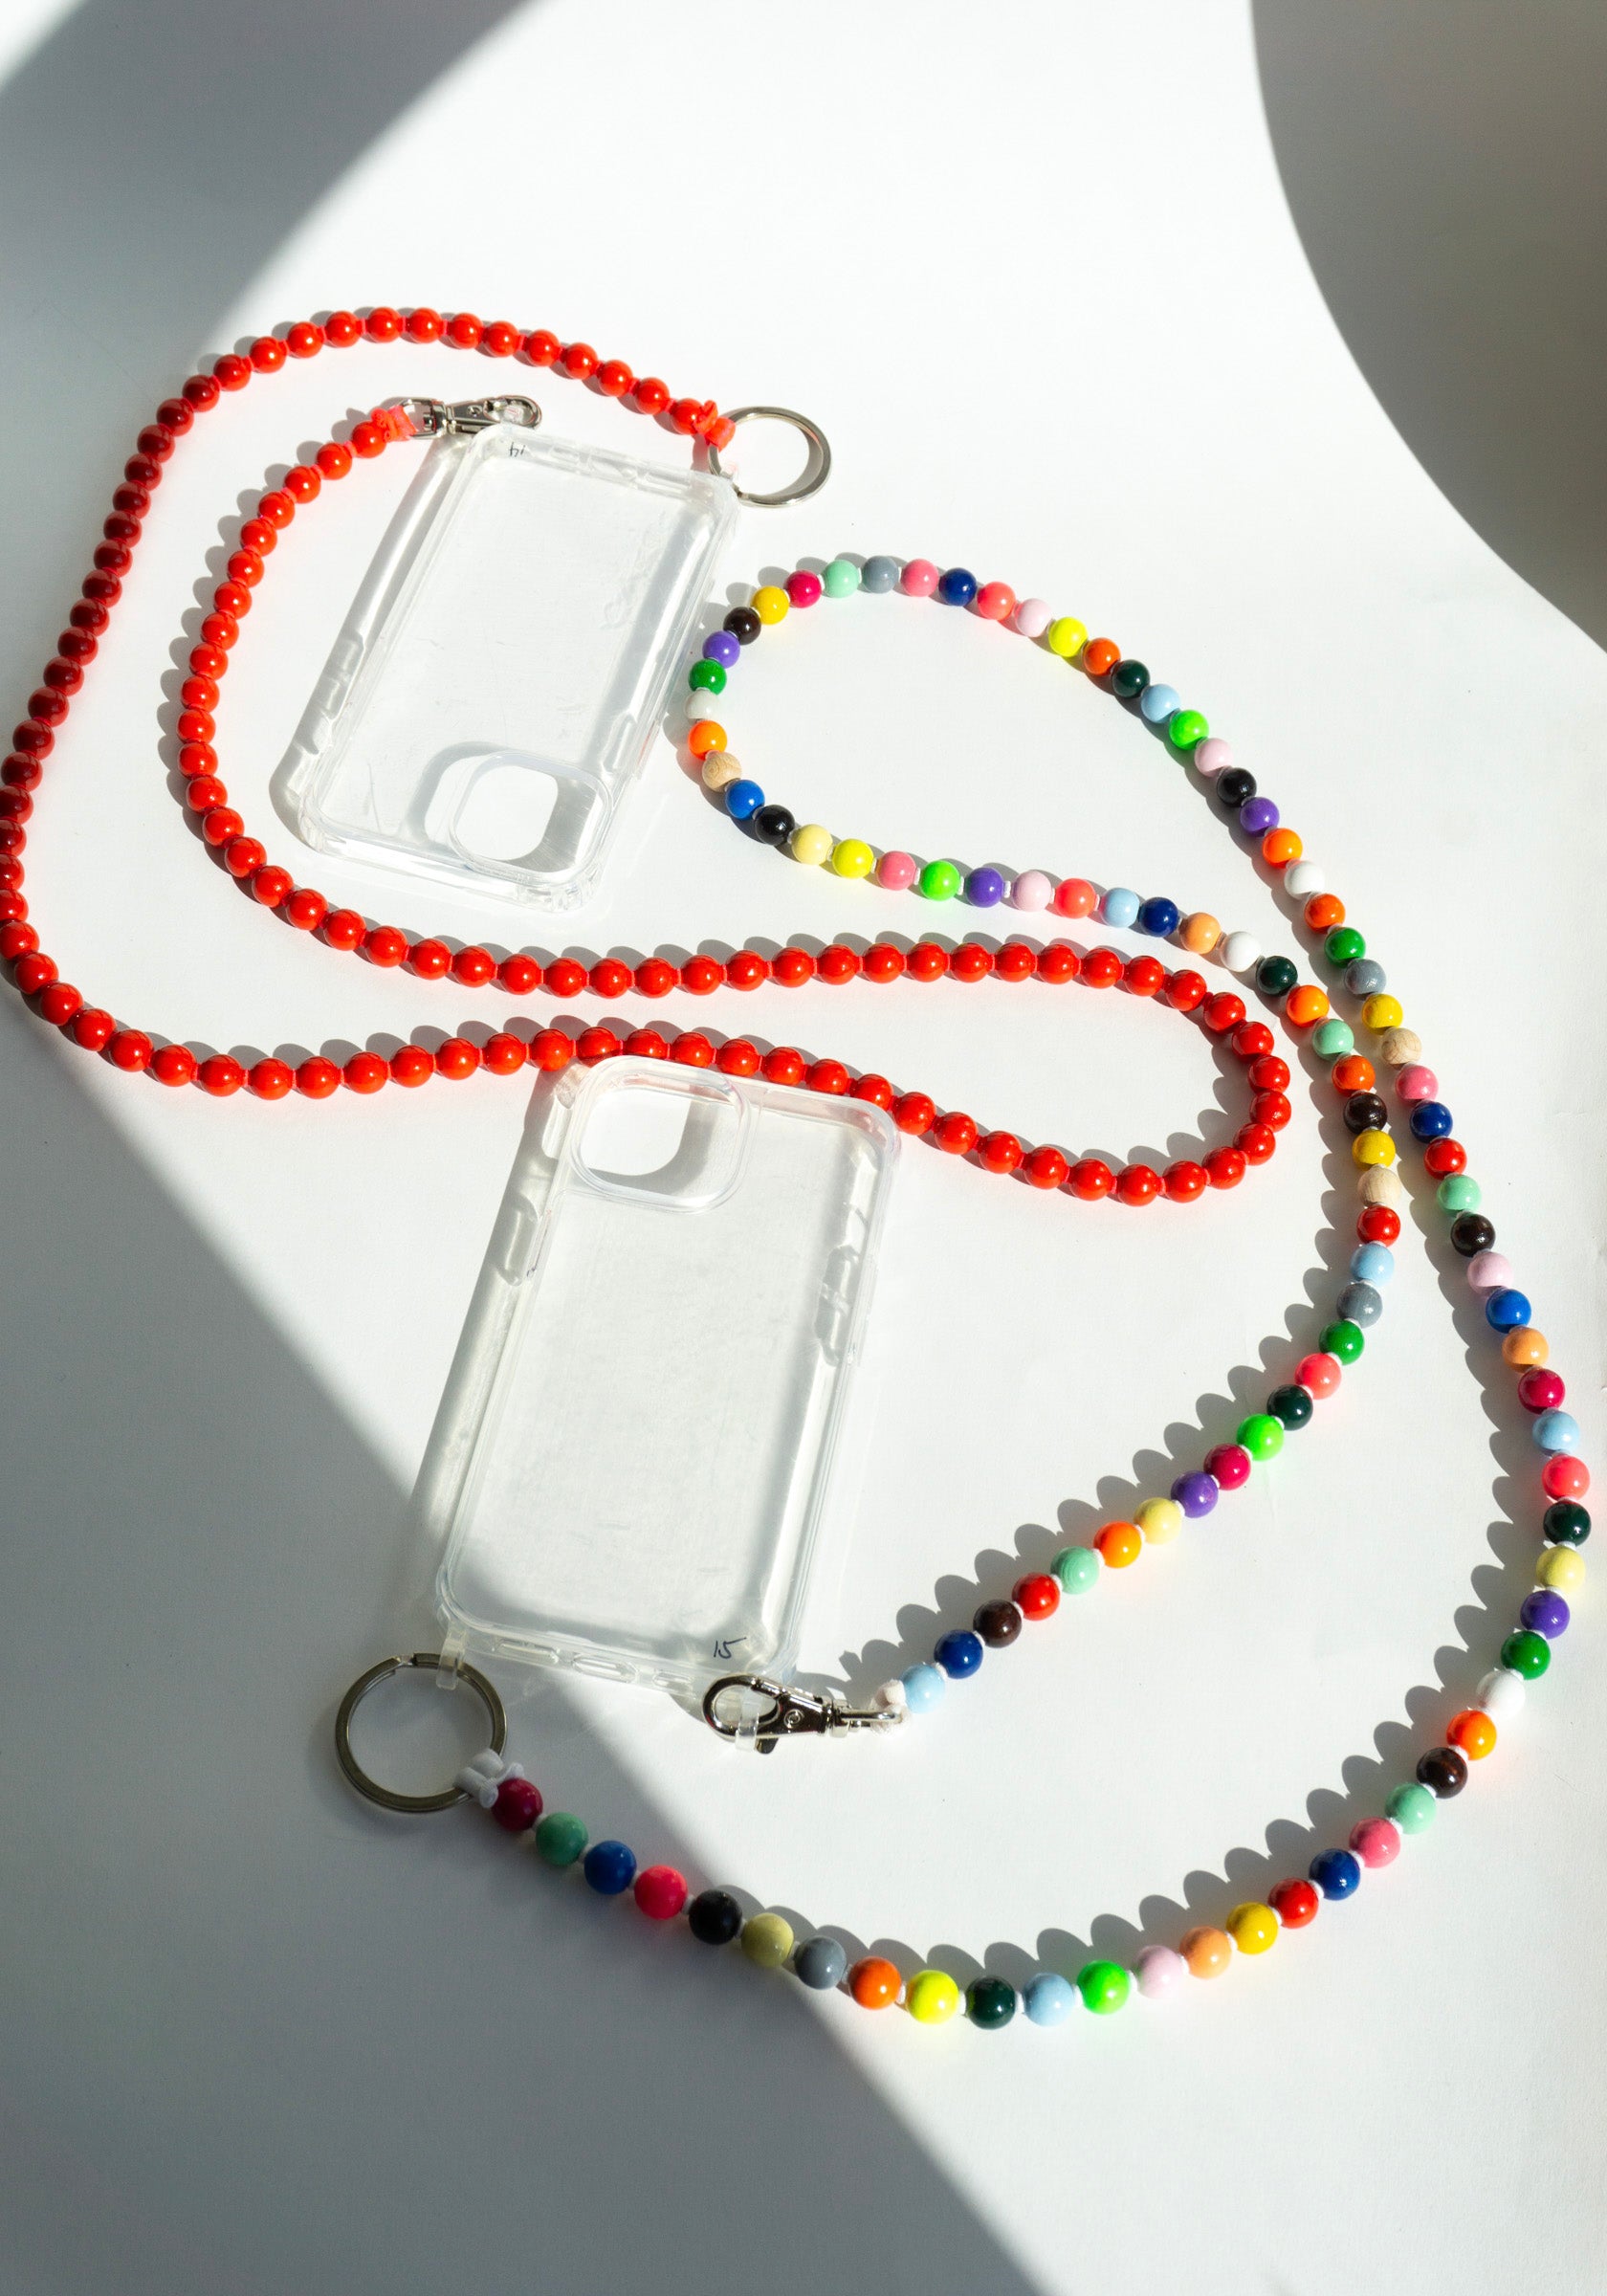 Ina Seifart Handykette iPhone Necklace in Multimix